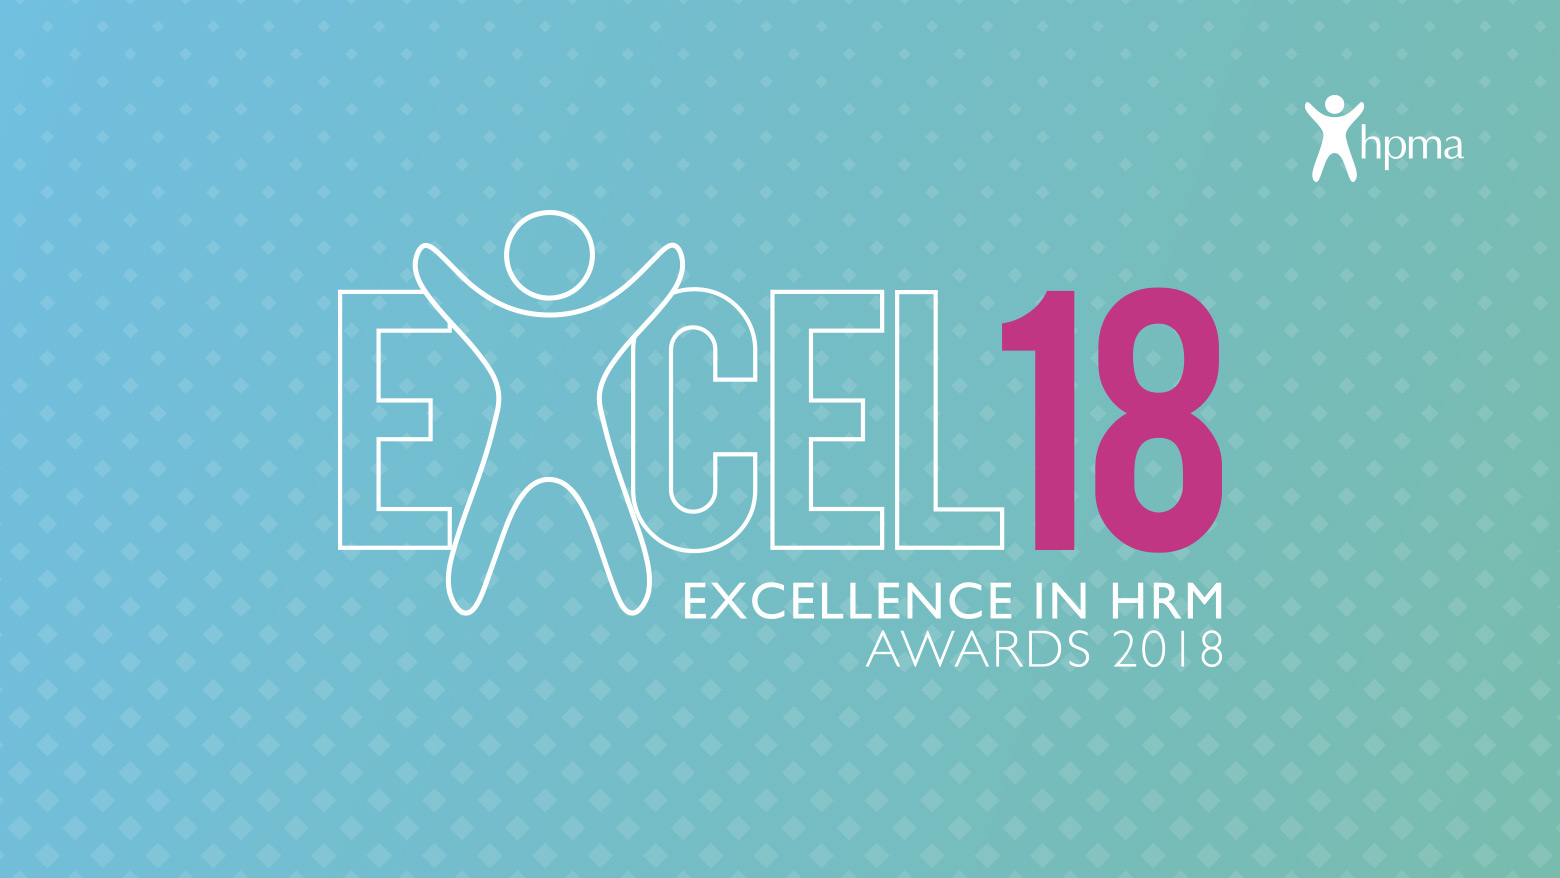 HPMA Excellence in HRM Awards - 2018